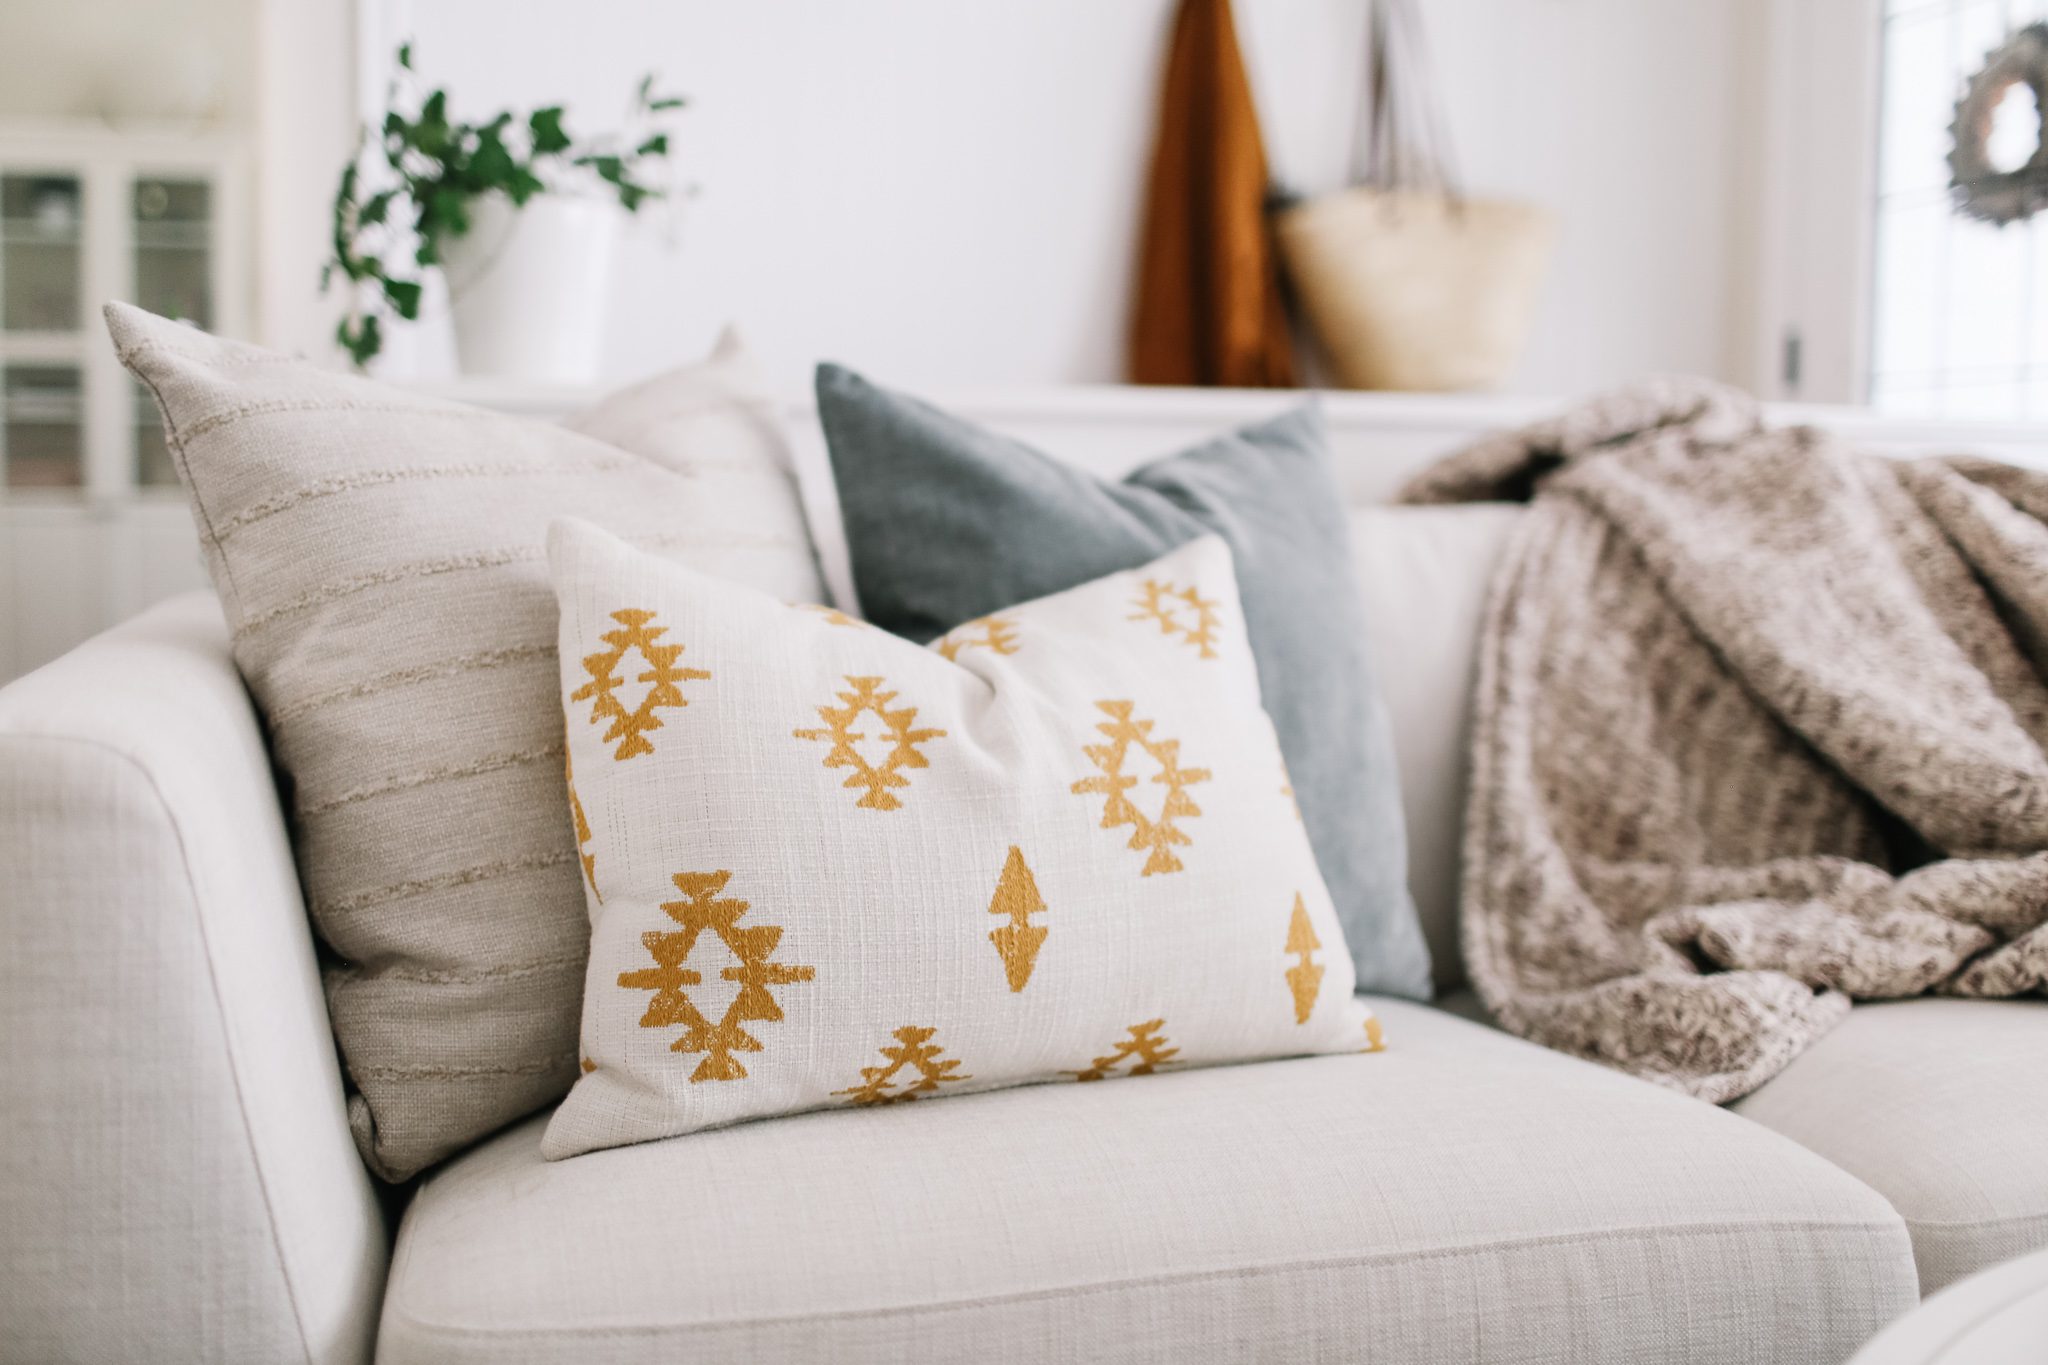 How To Decorate Sofa With Pillows